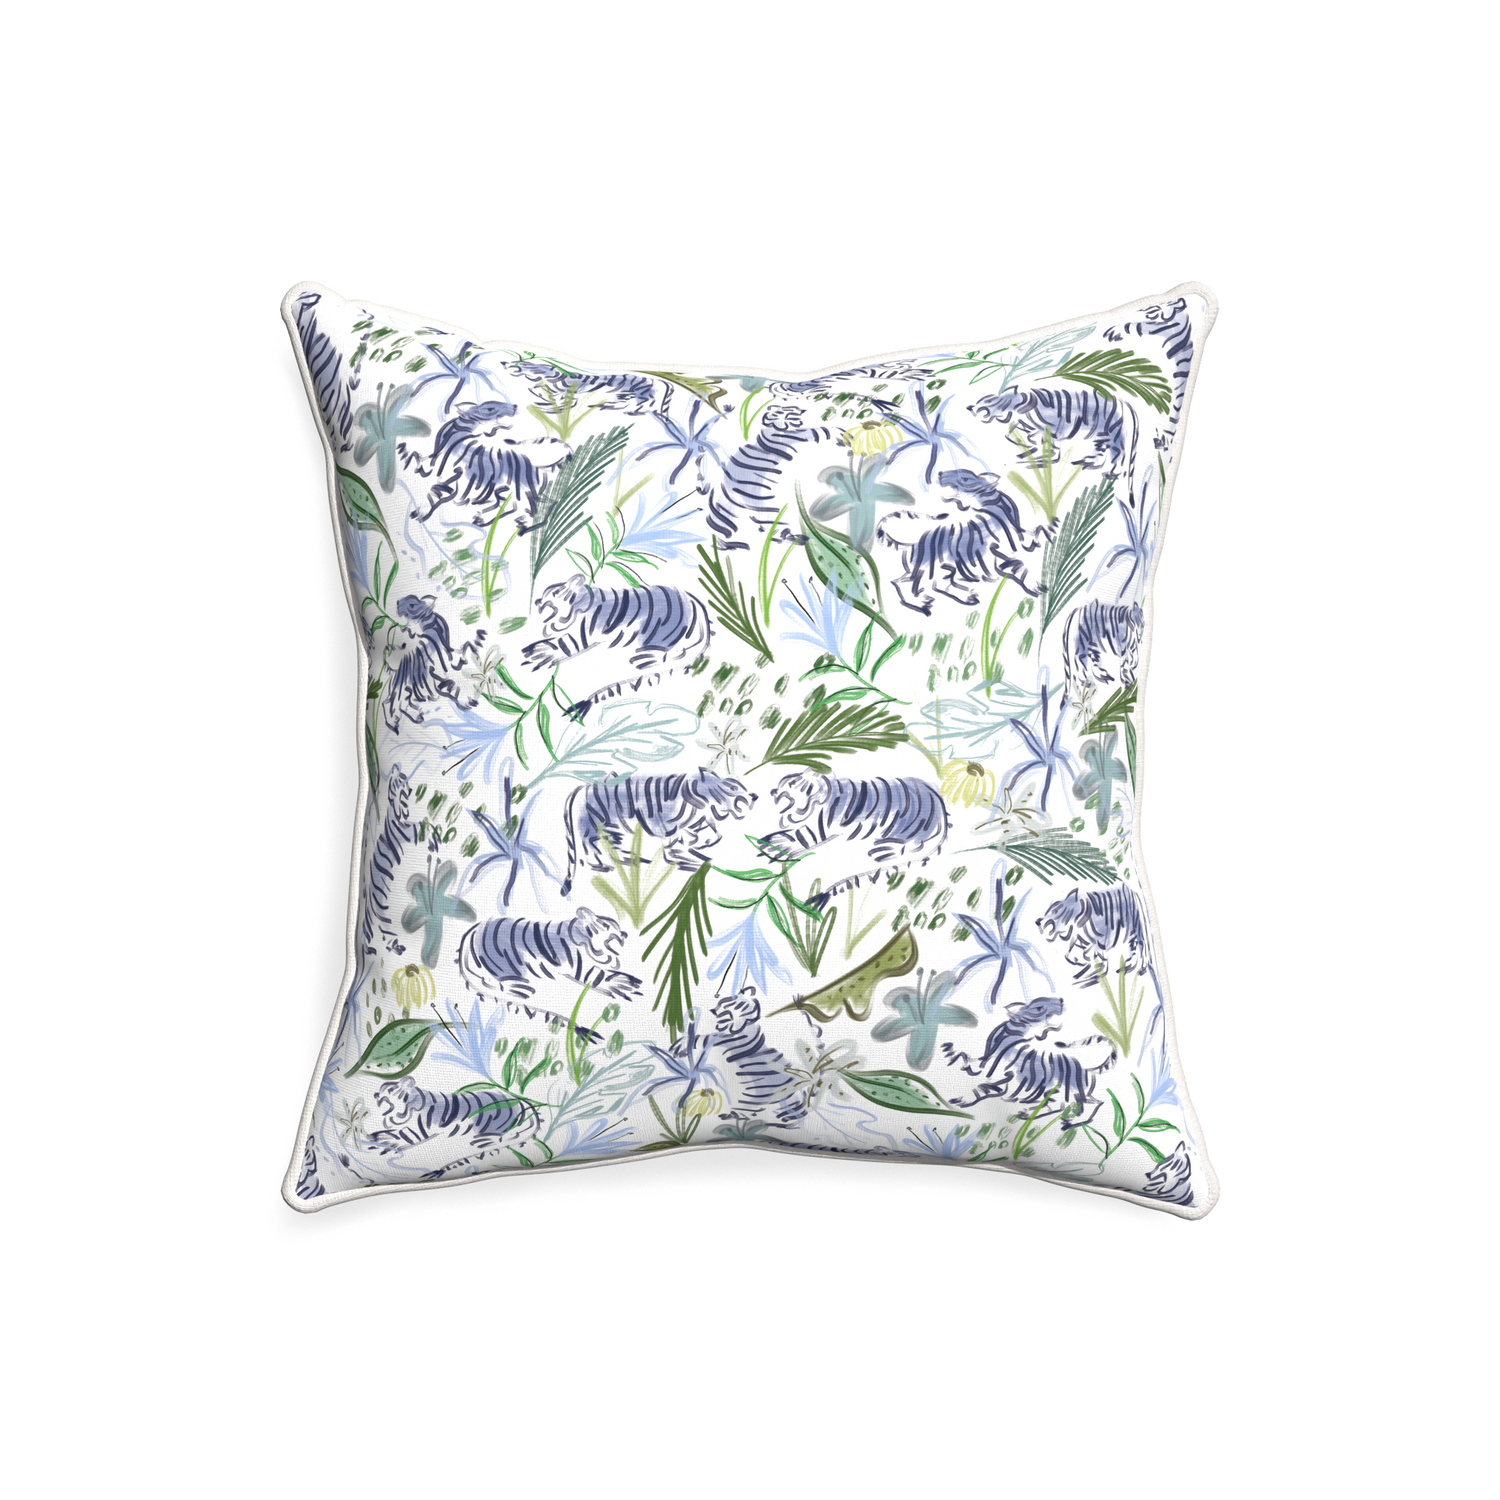 20-square frida green custom pillow with snow piping on white background